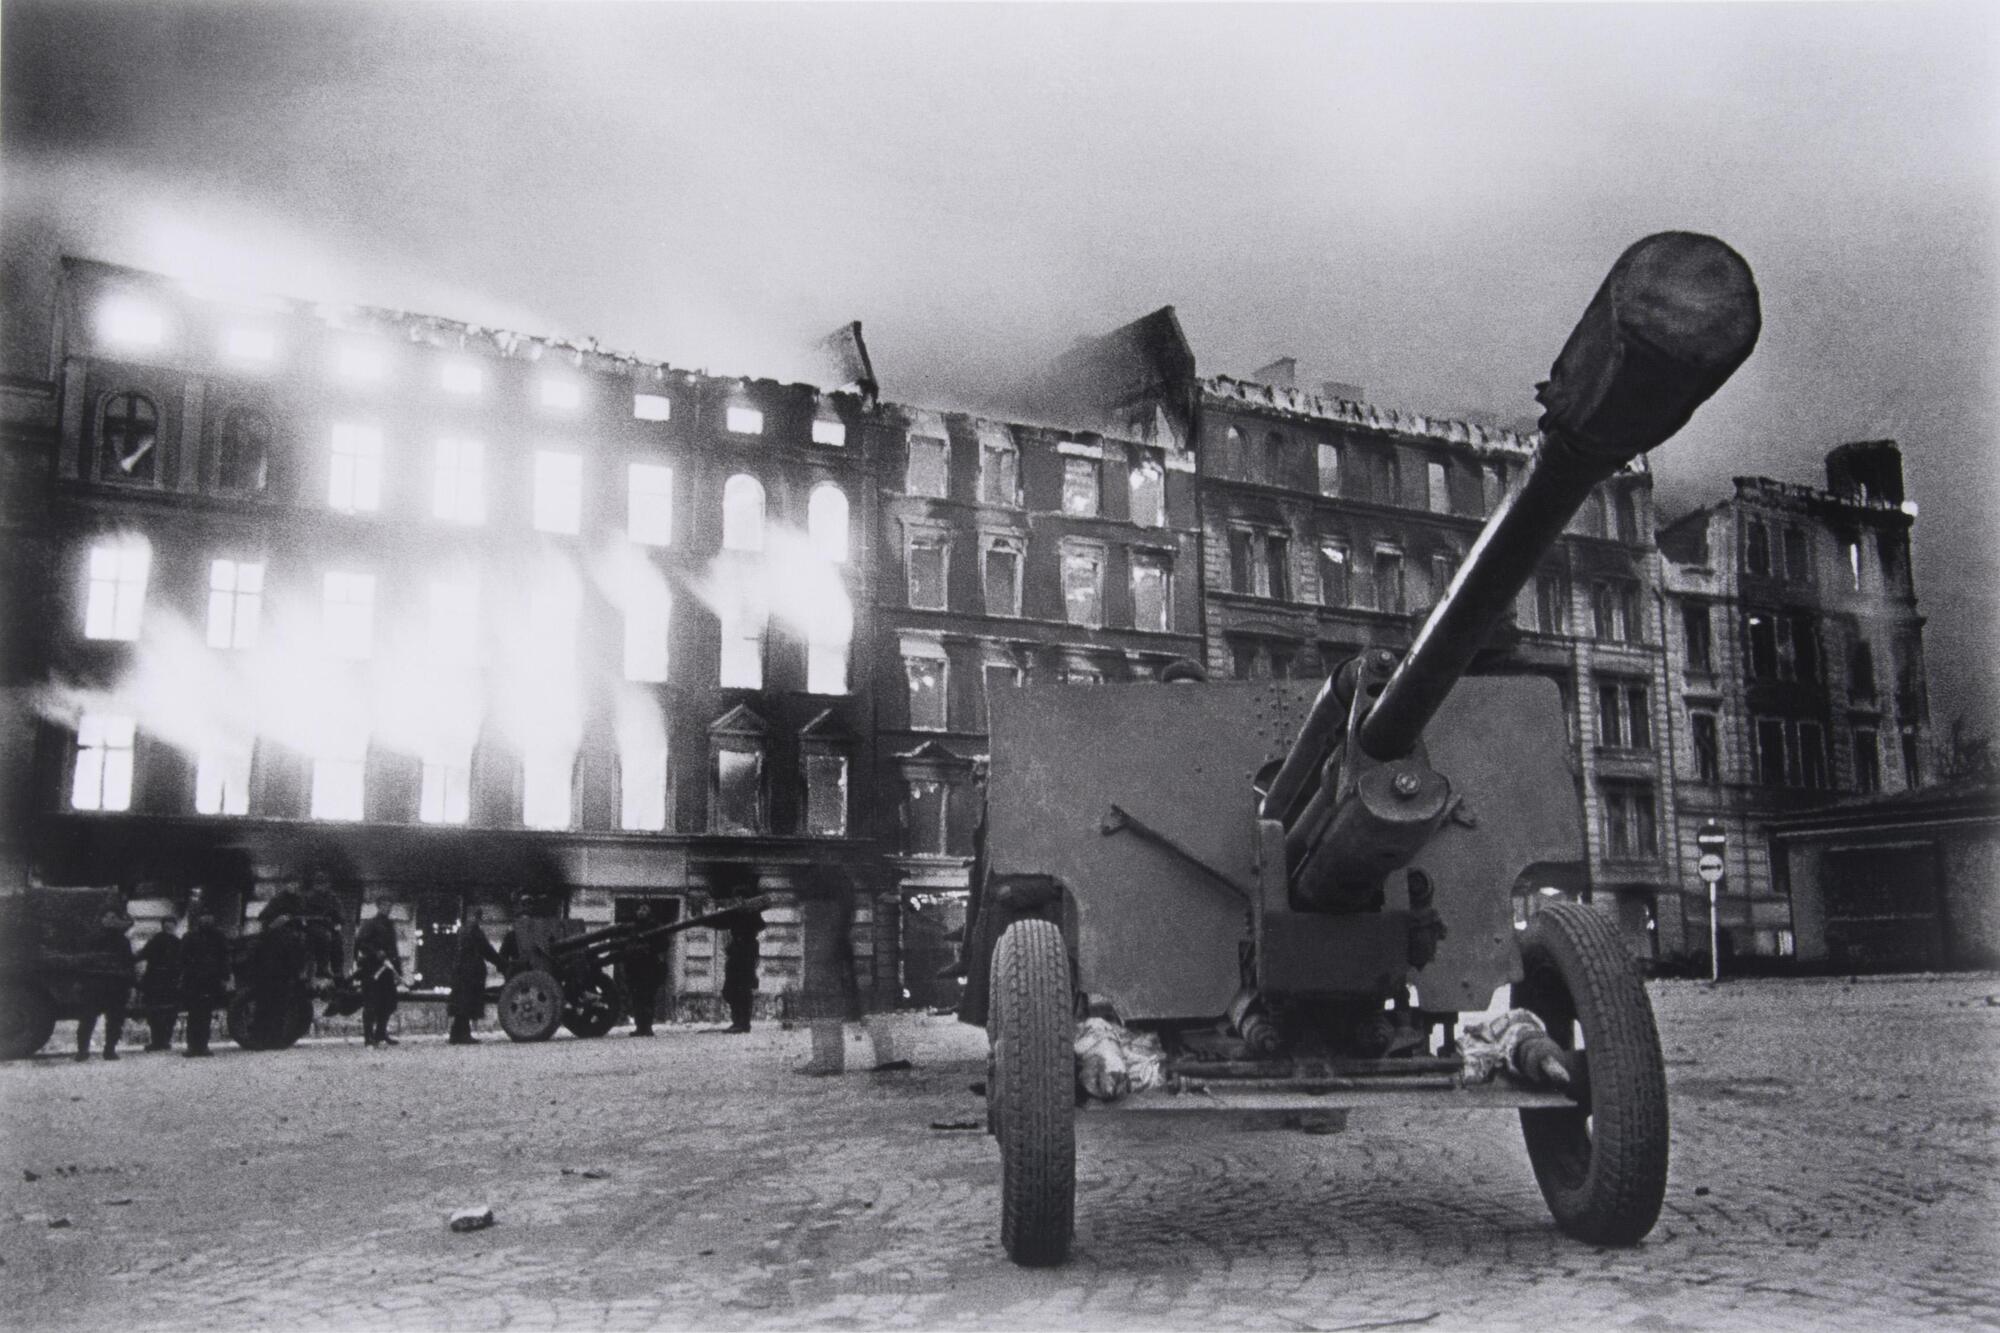 The barrel of an antitank gun points out of the picture plane; a building has caught fire in the distance. 